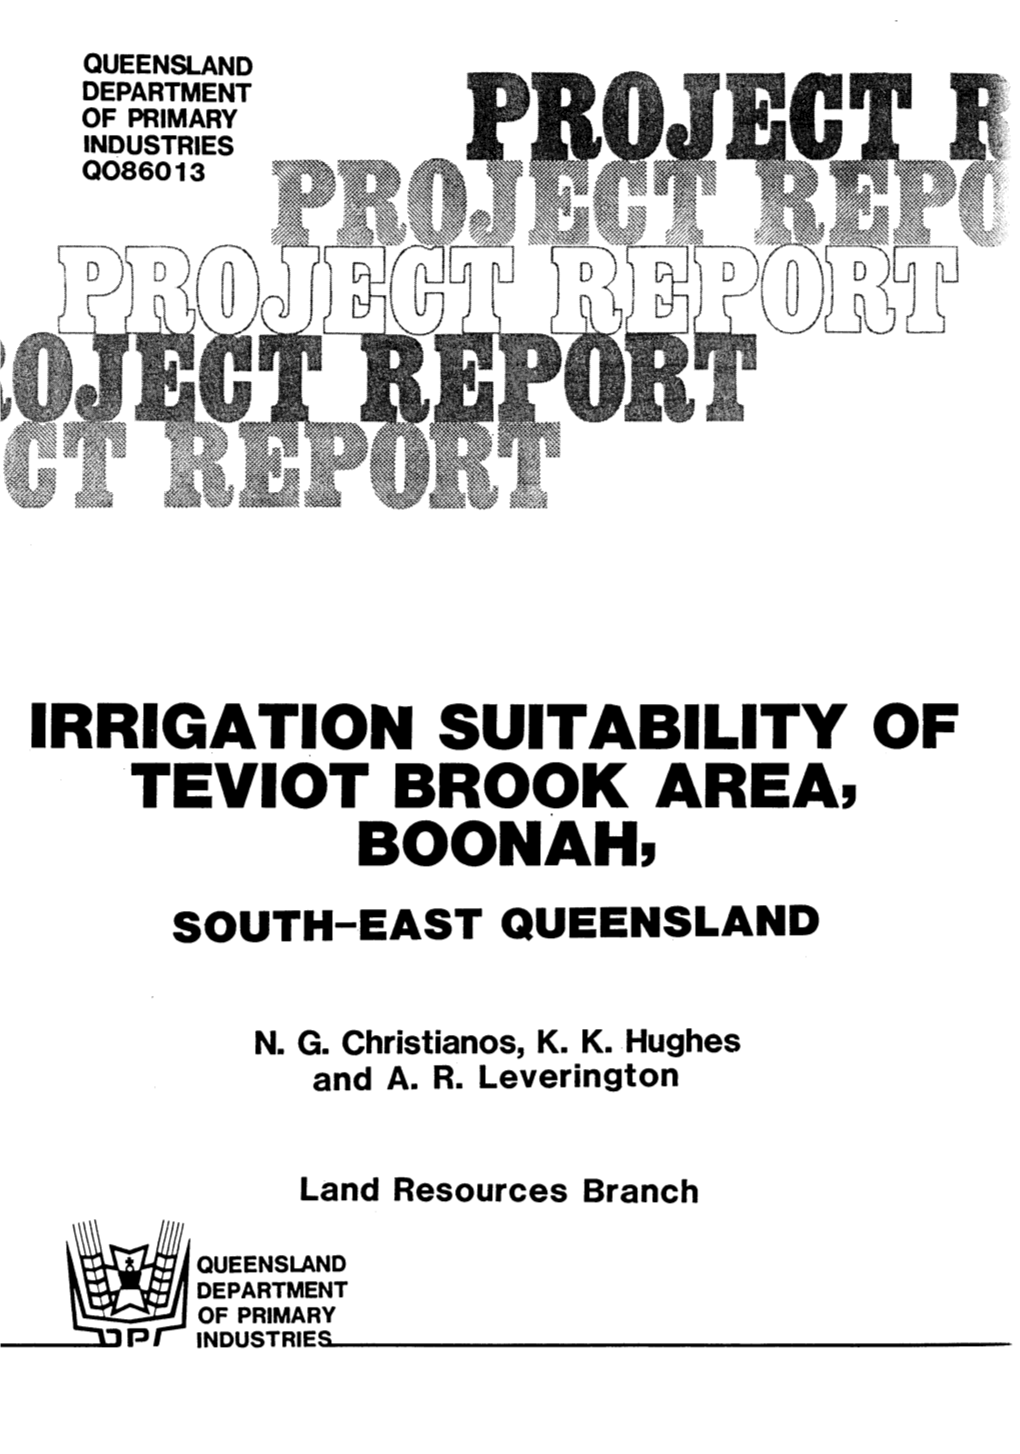 Irrigation Suitability of Teviot Brook Area, Boonah, South-East Queensland